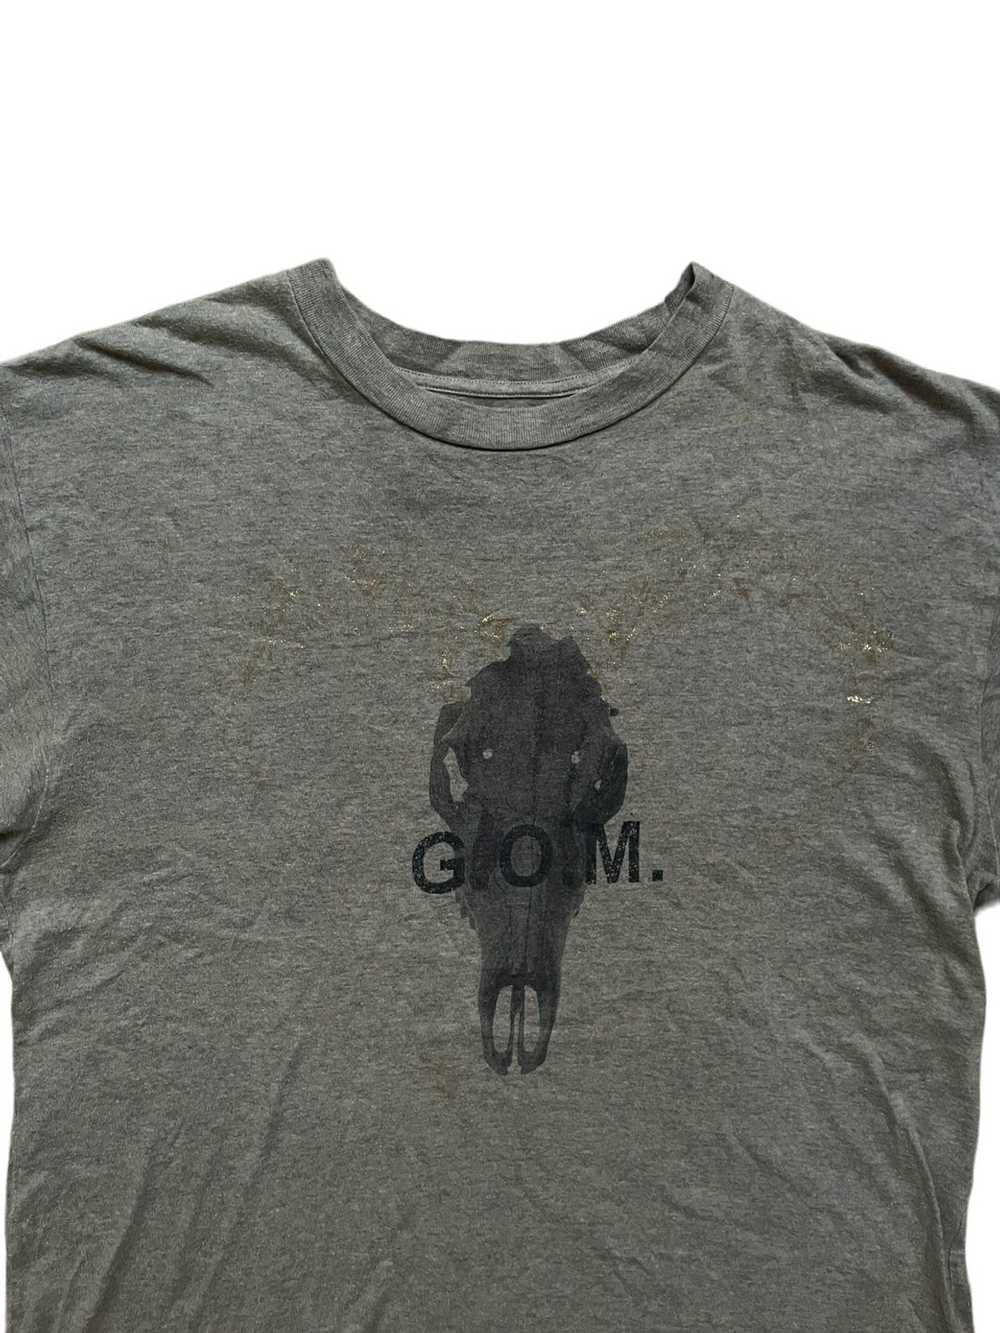 Gomme Homme × Japanese Brand Gomme Homme T Shirt - image 2